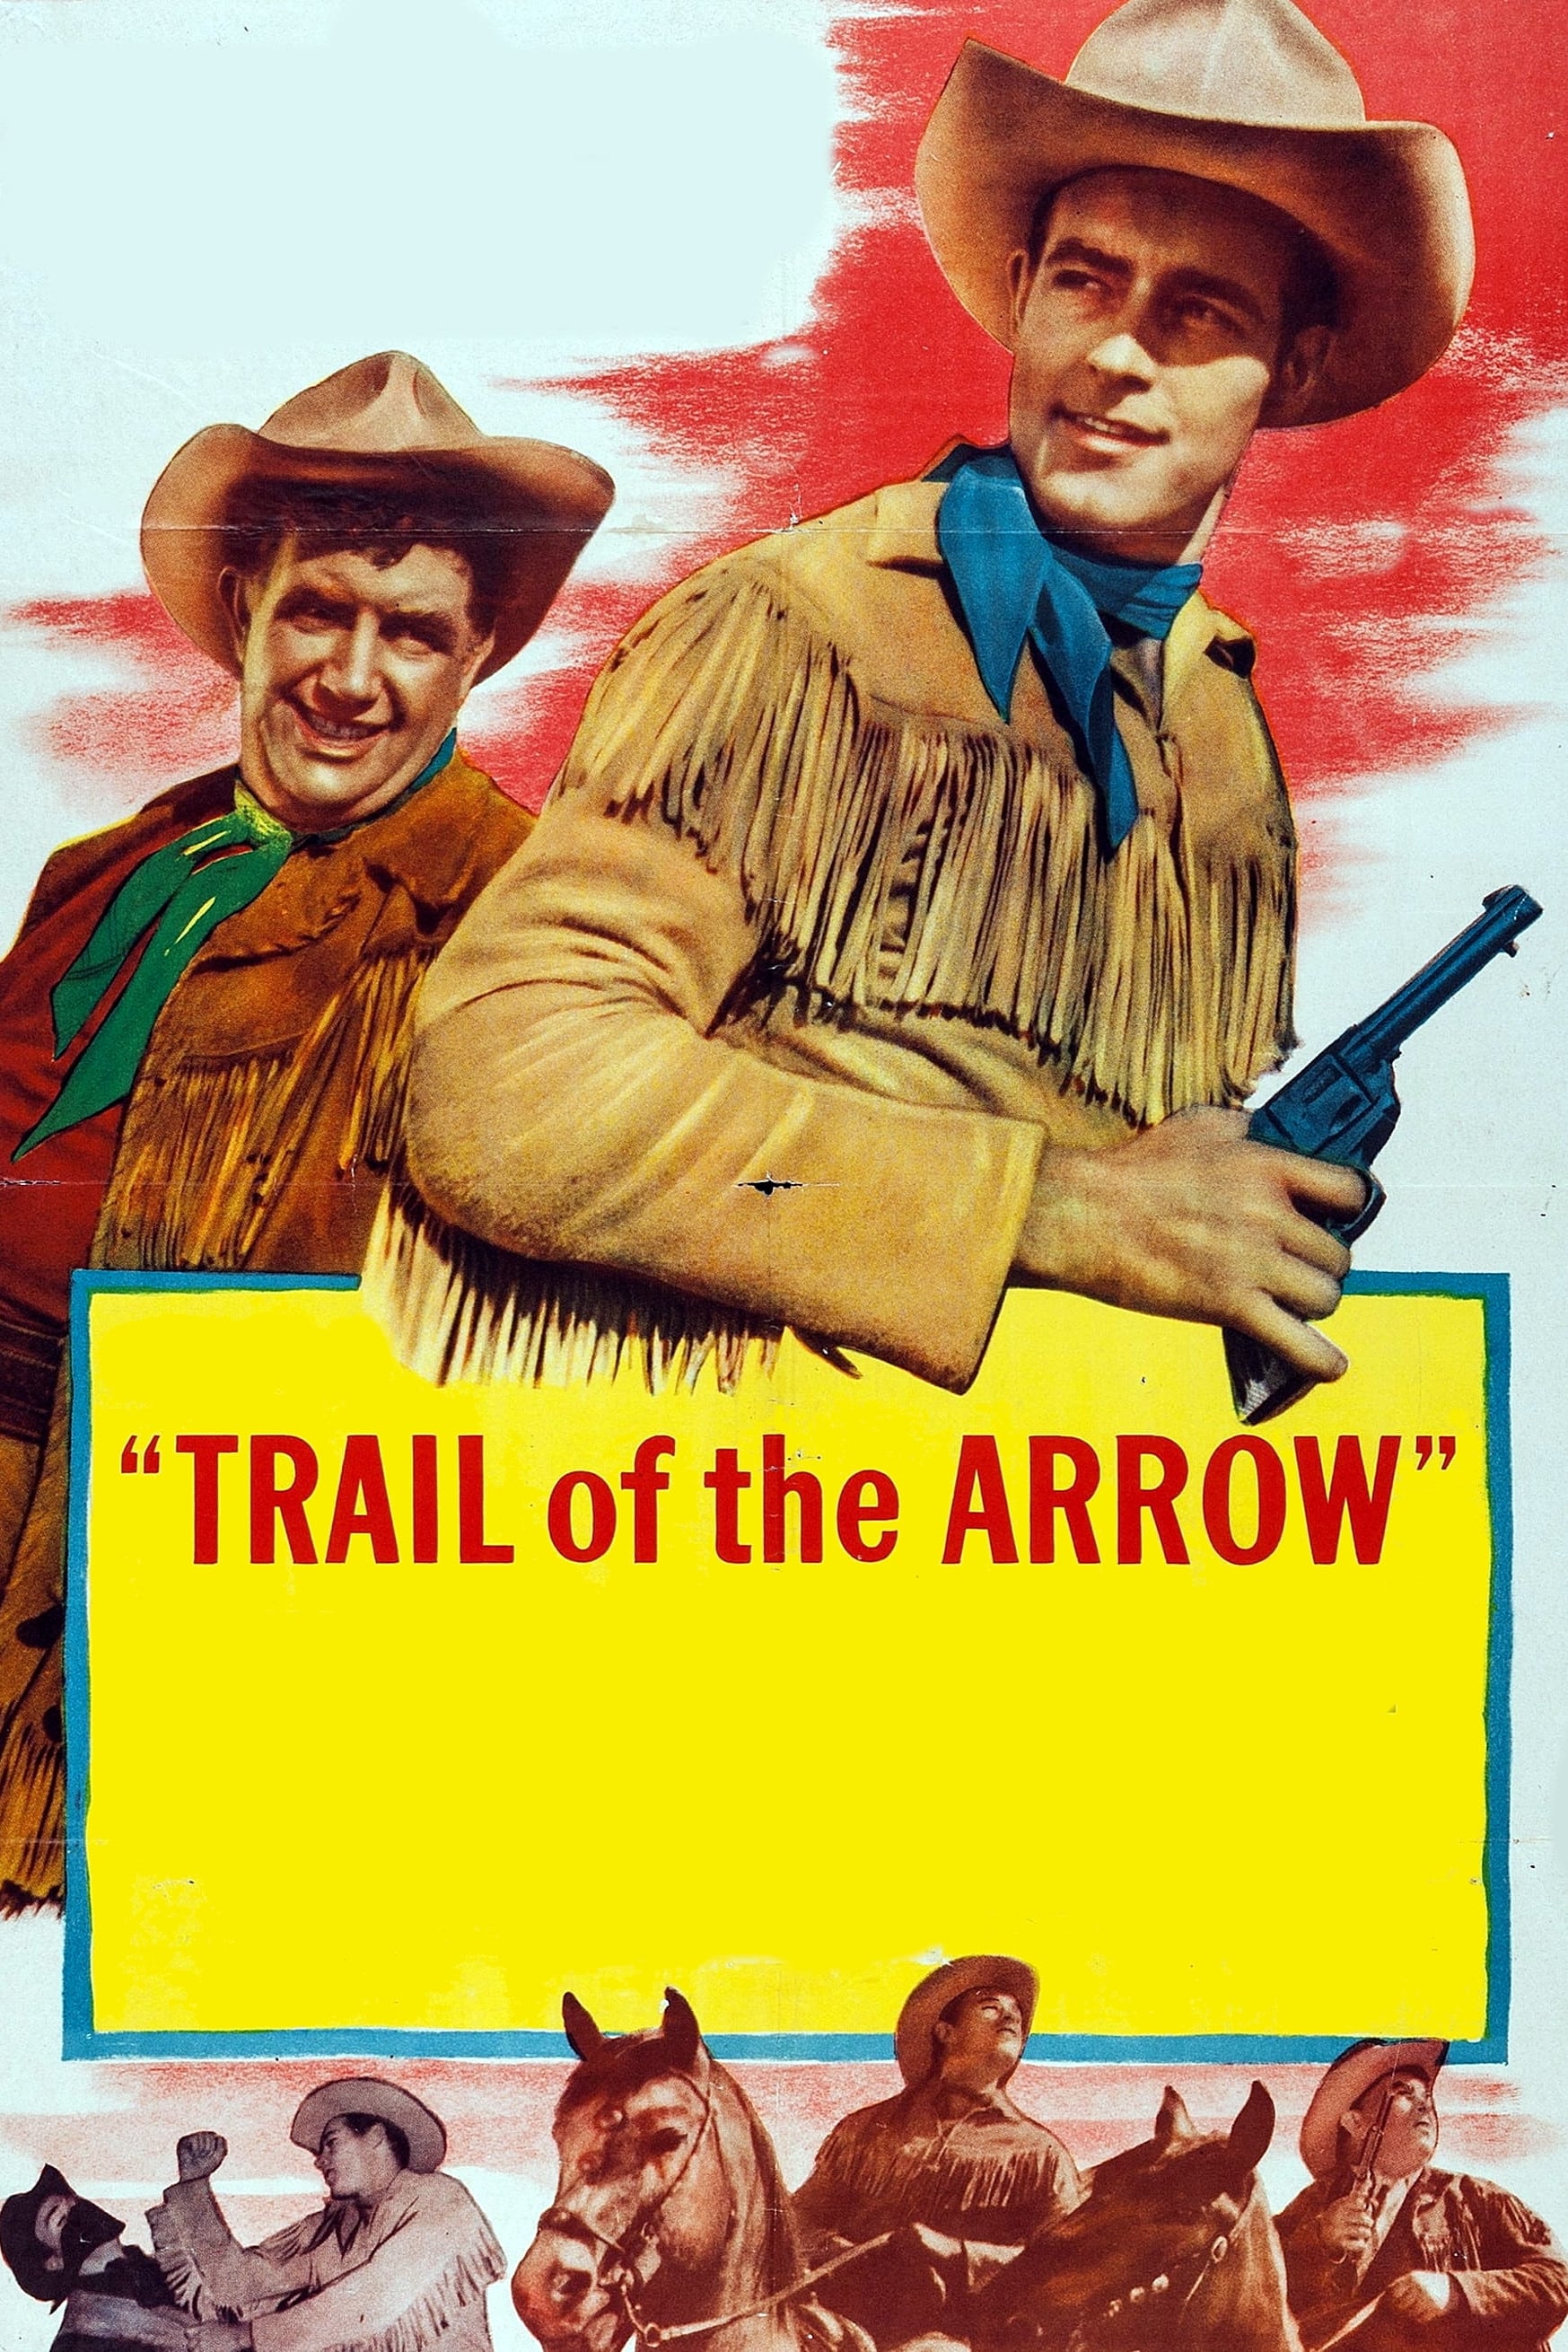 Trail of the Arrow (1952)